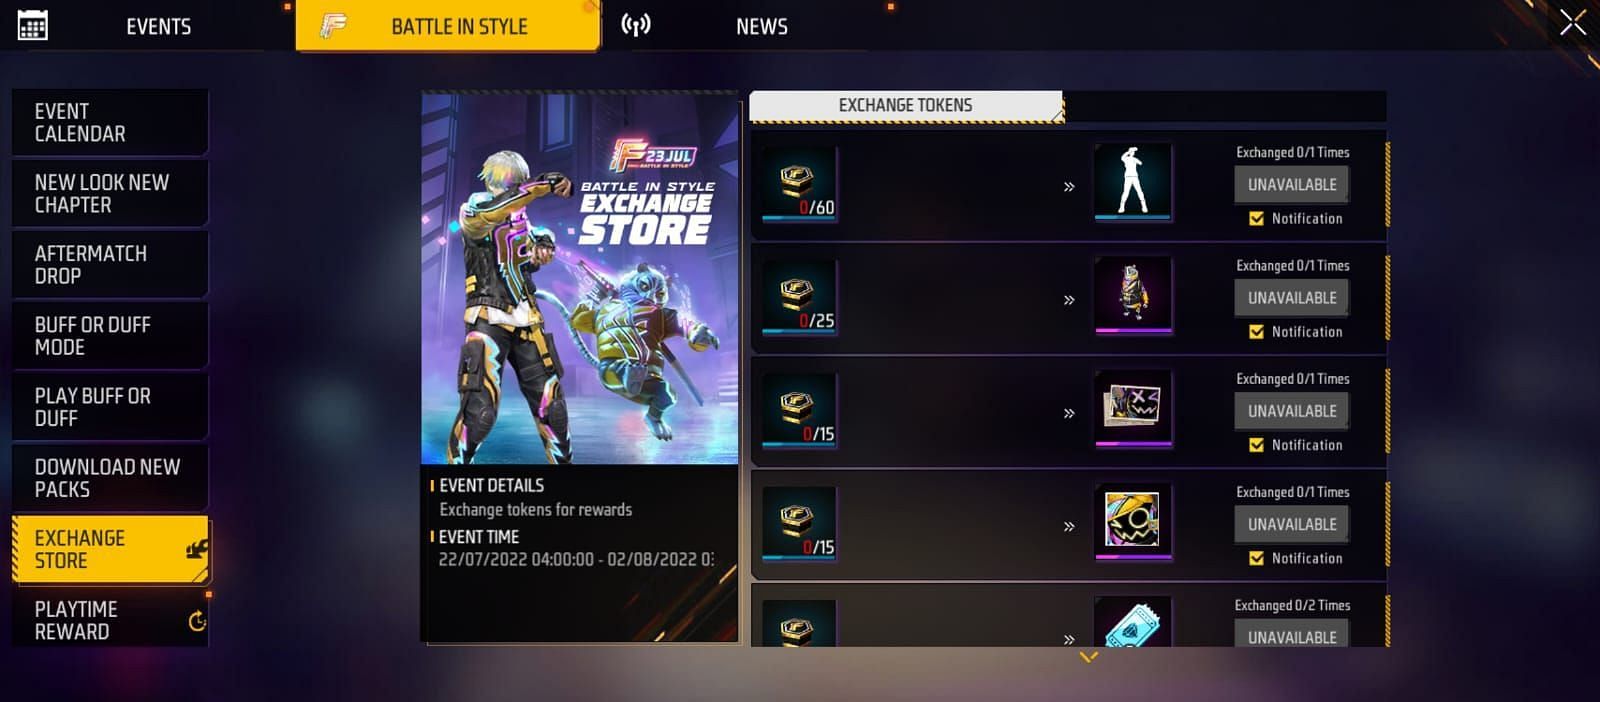 Rewards that mobile gamers can claim by exchanging tokens (Image via Garena)